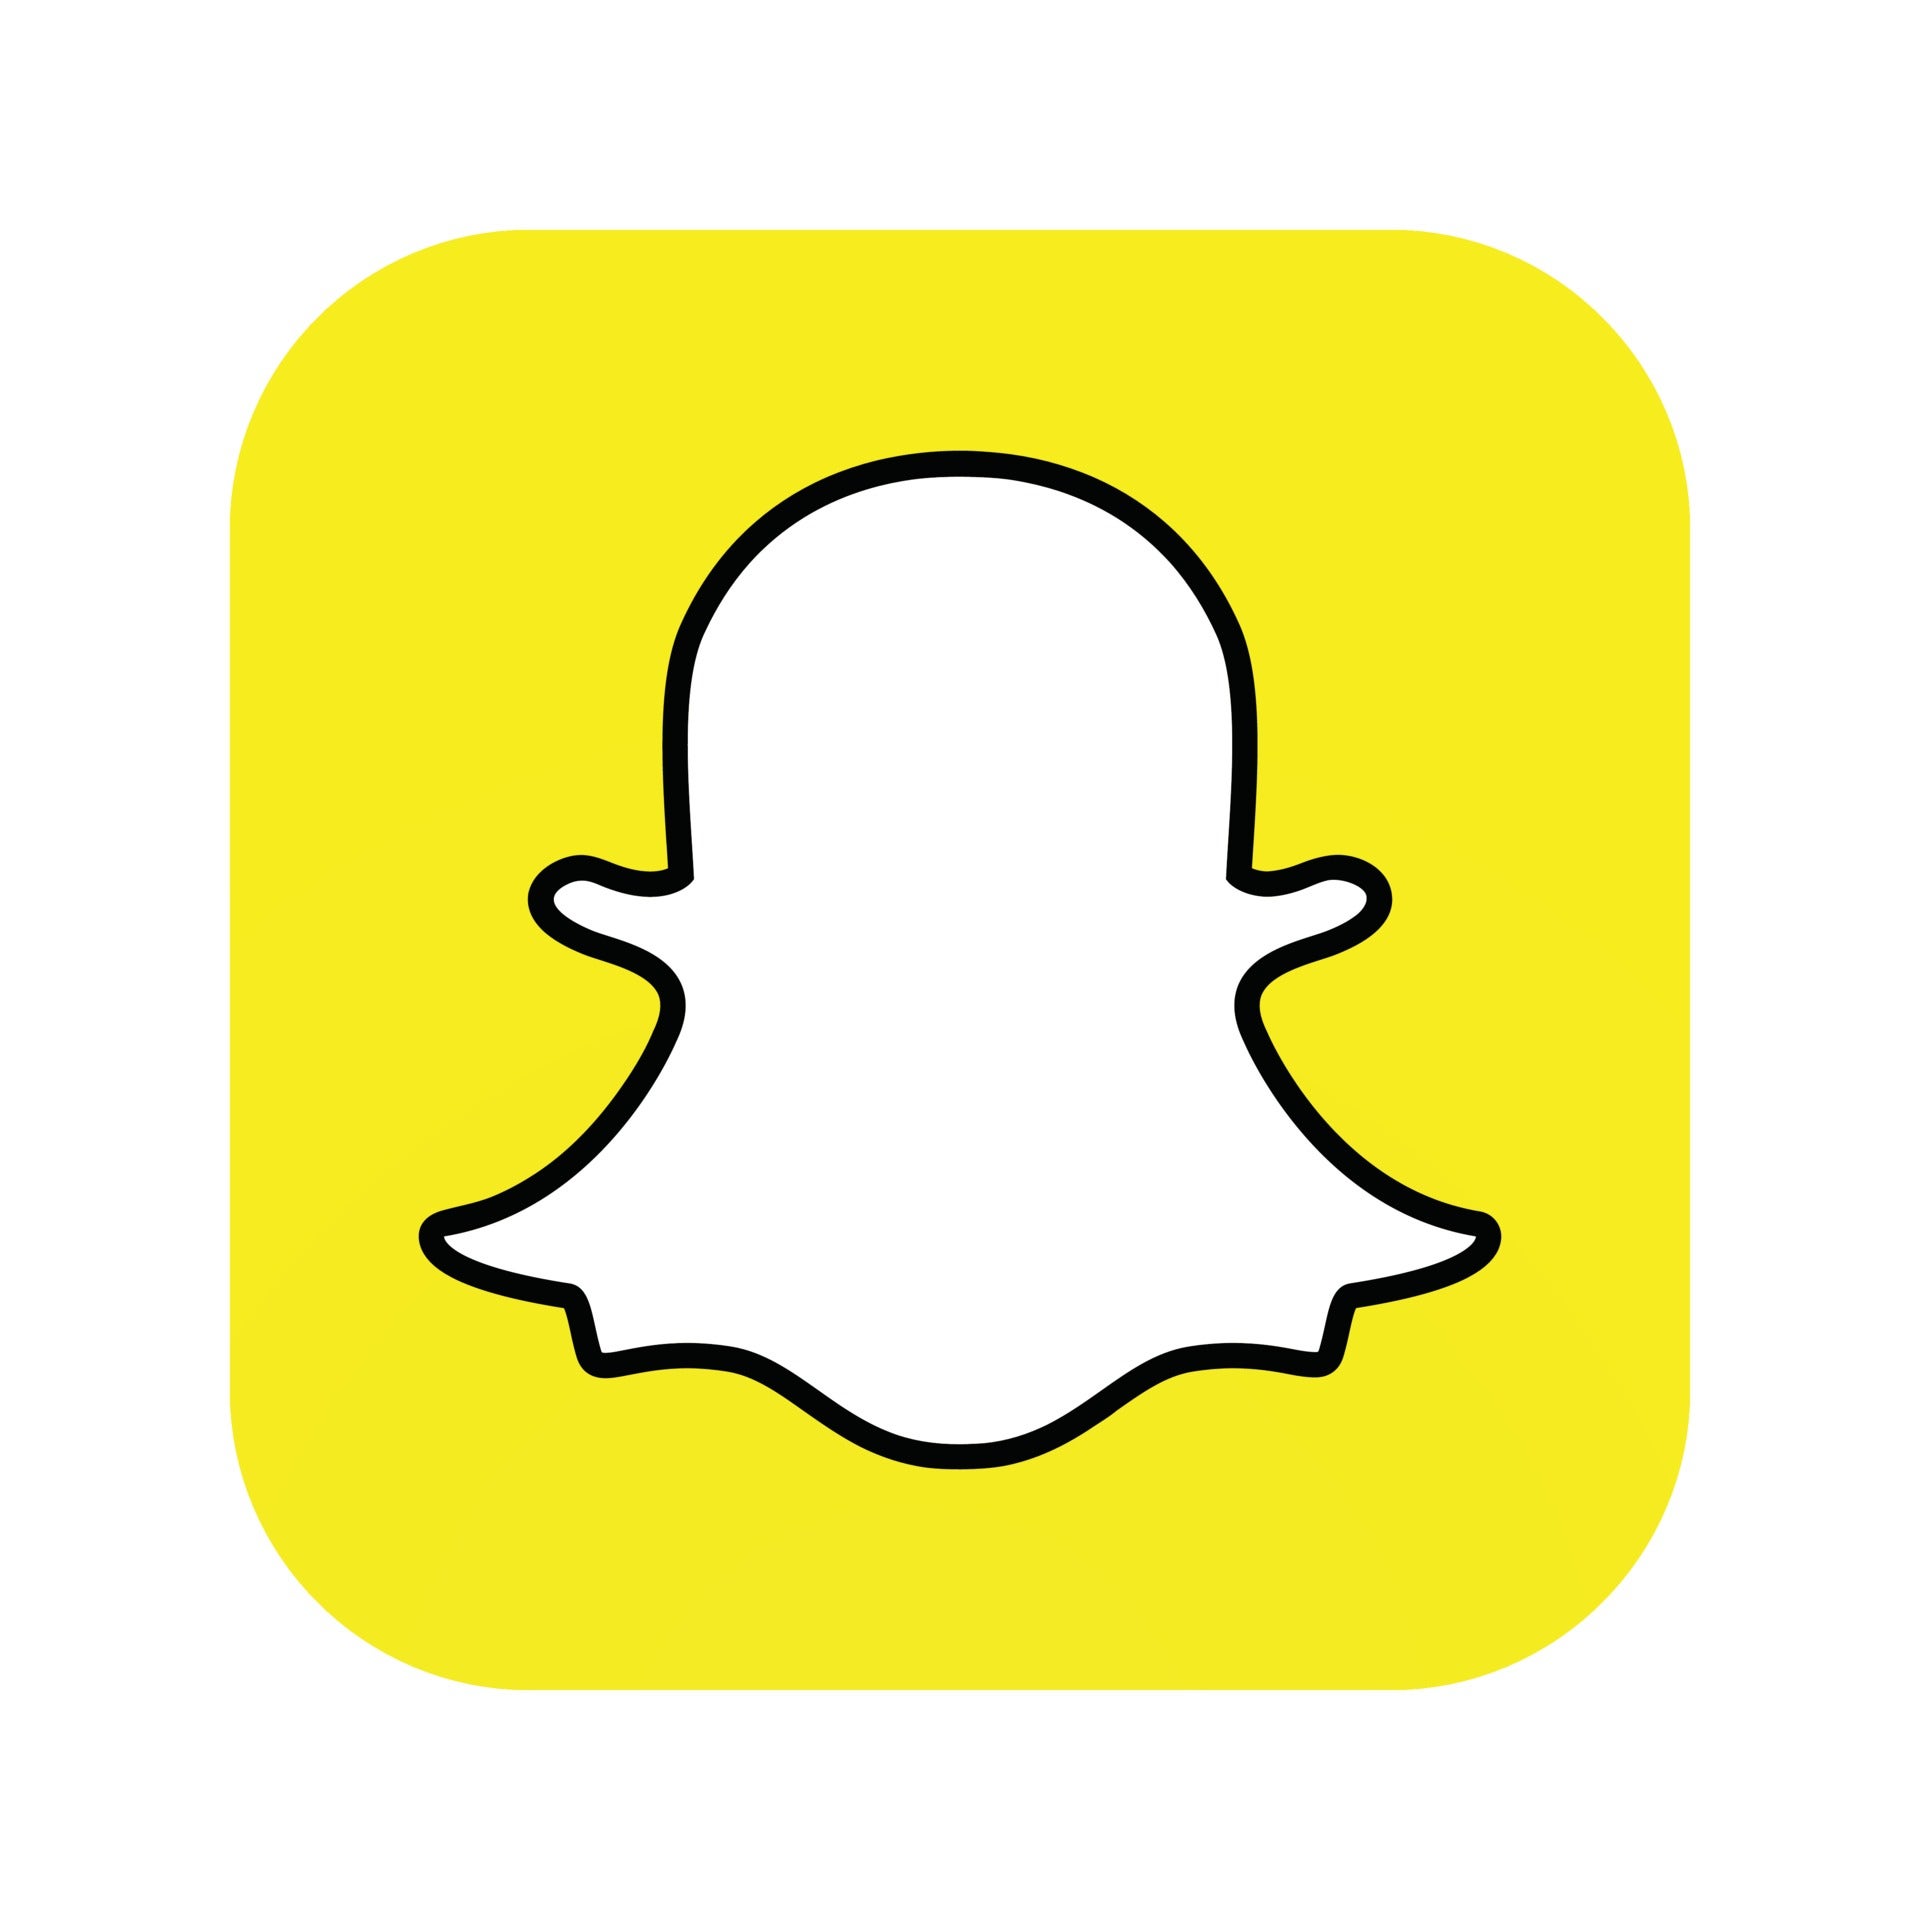 Snap To Surge Around 20%? Here Are 5 Other Price Target Changes For Tuesday